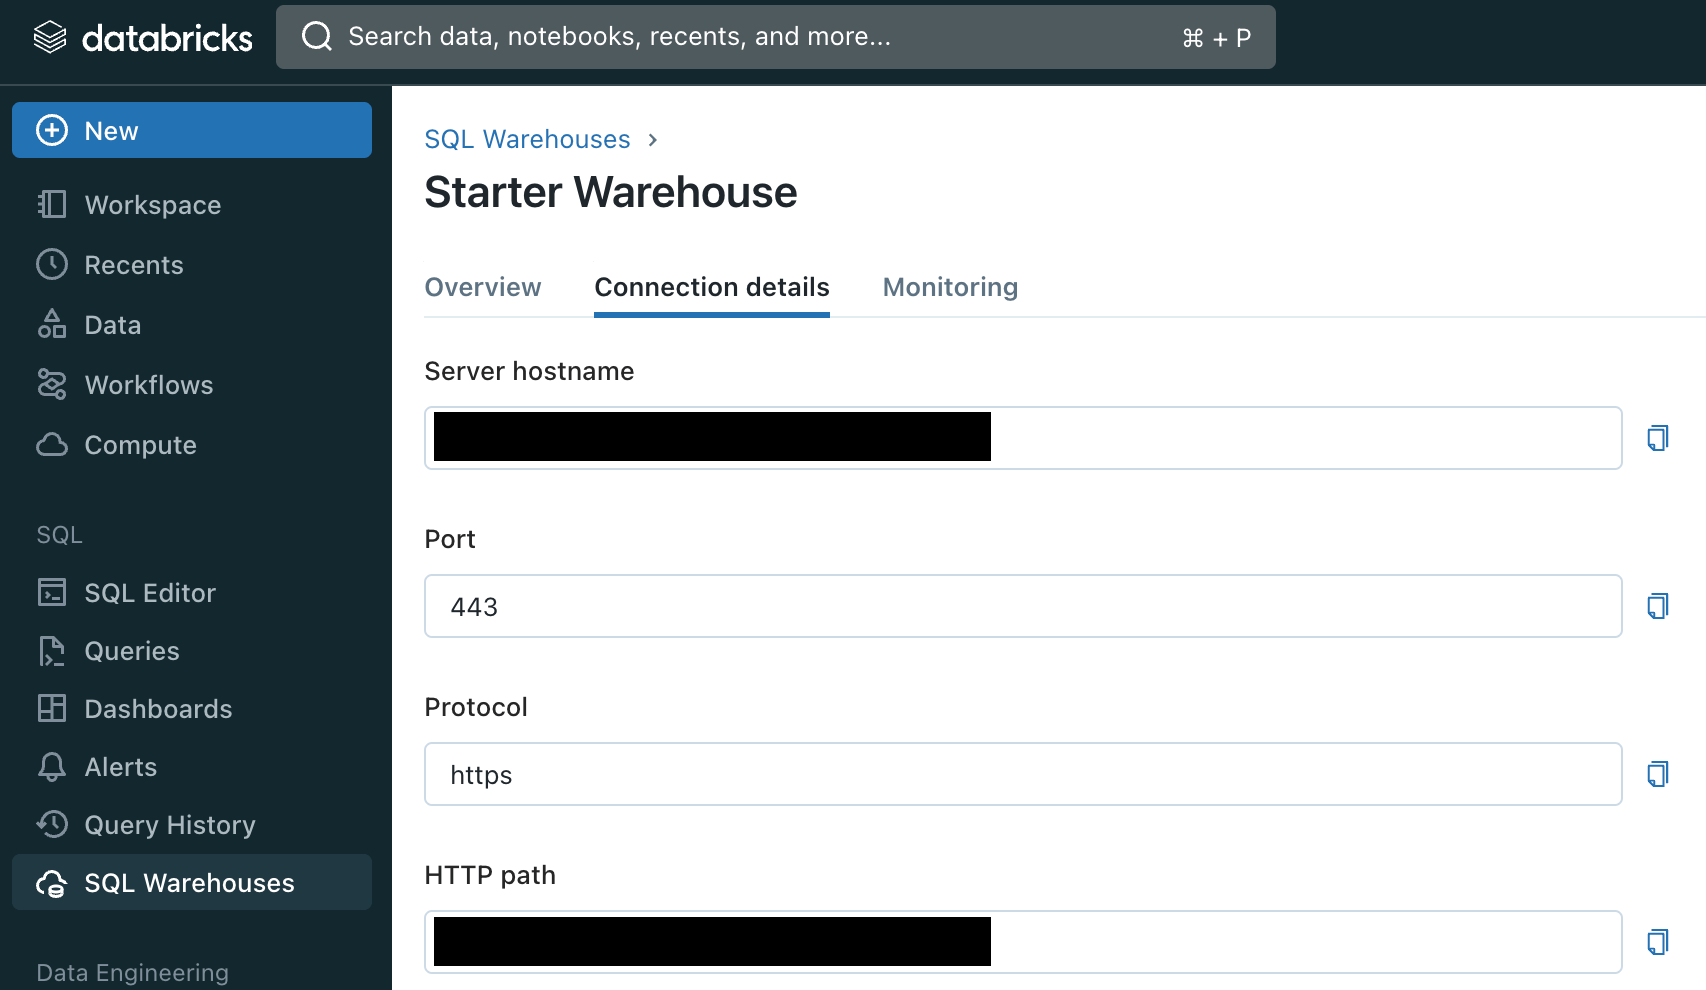 Finding SQL Warehouse Connection Details in Databricks